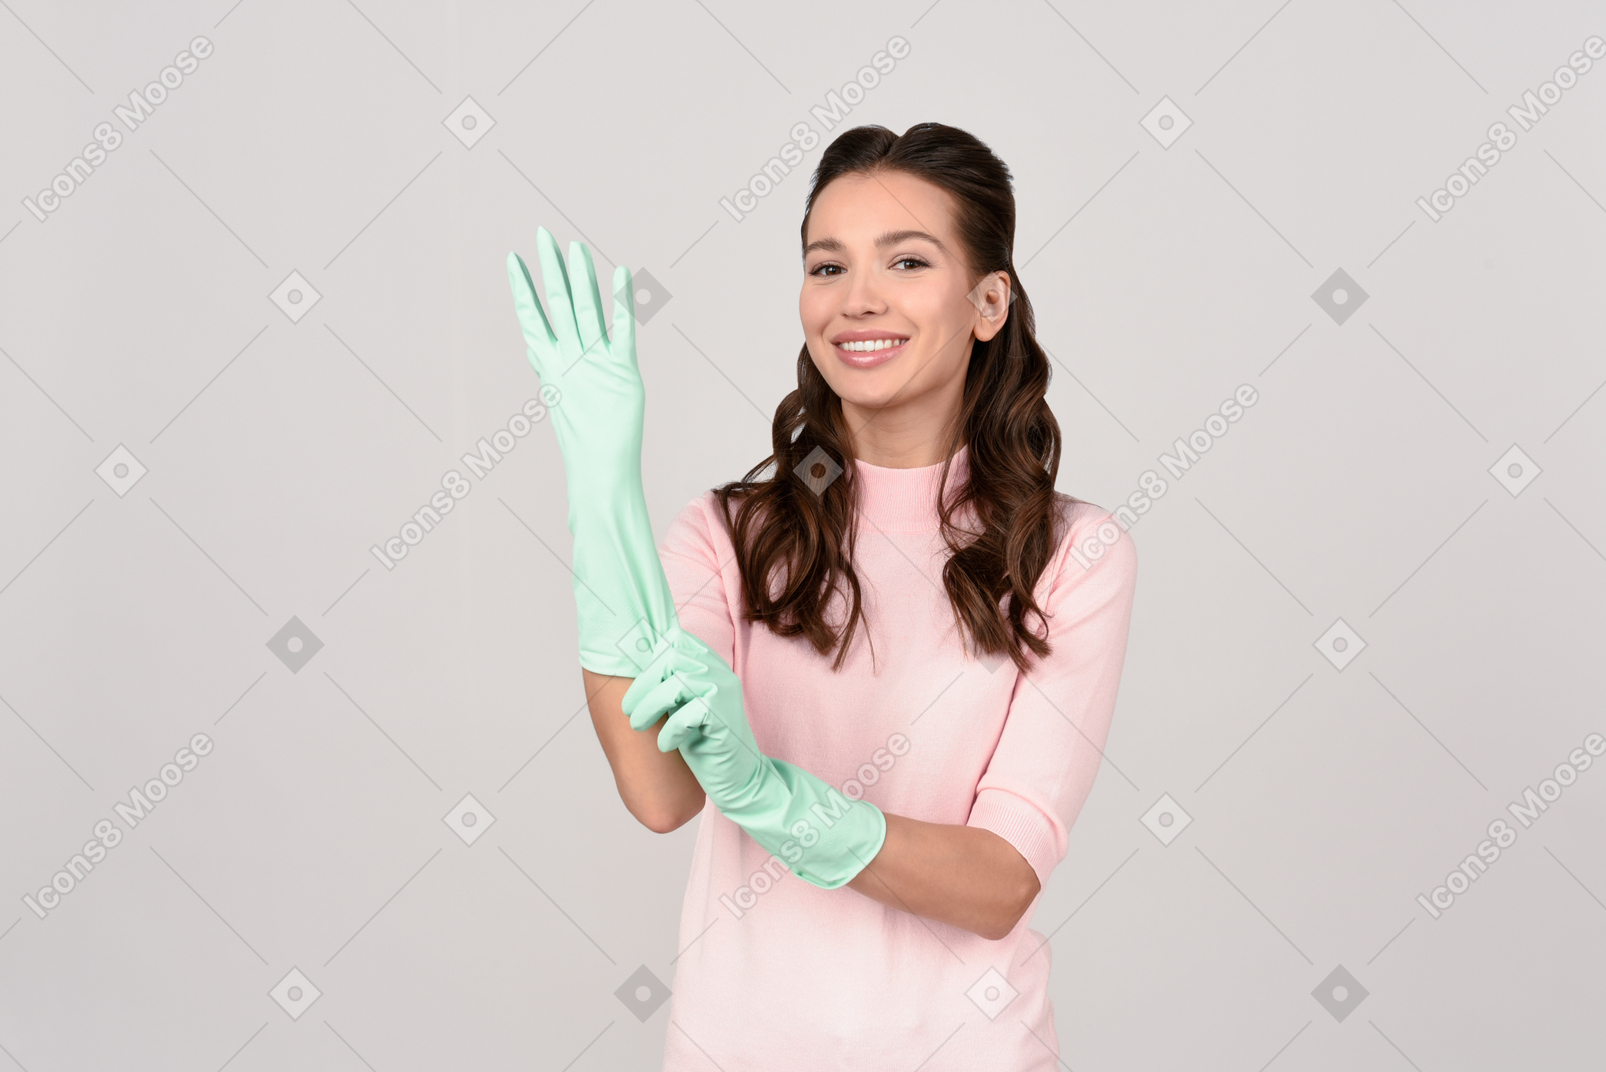 Attractive young woman putting on cleaning gloves